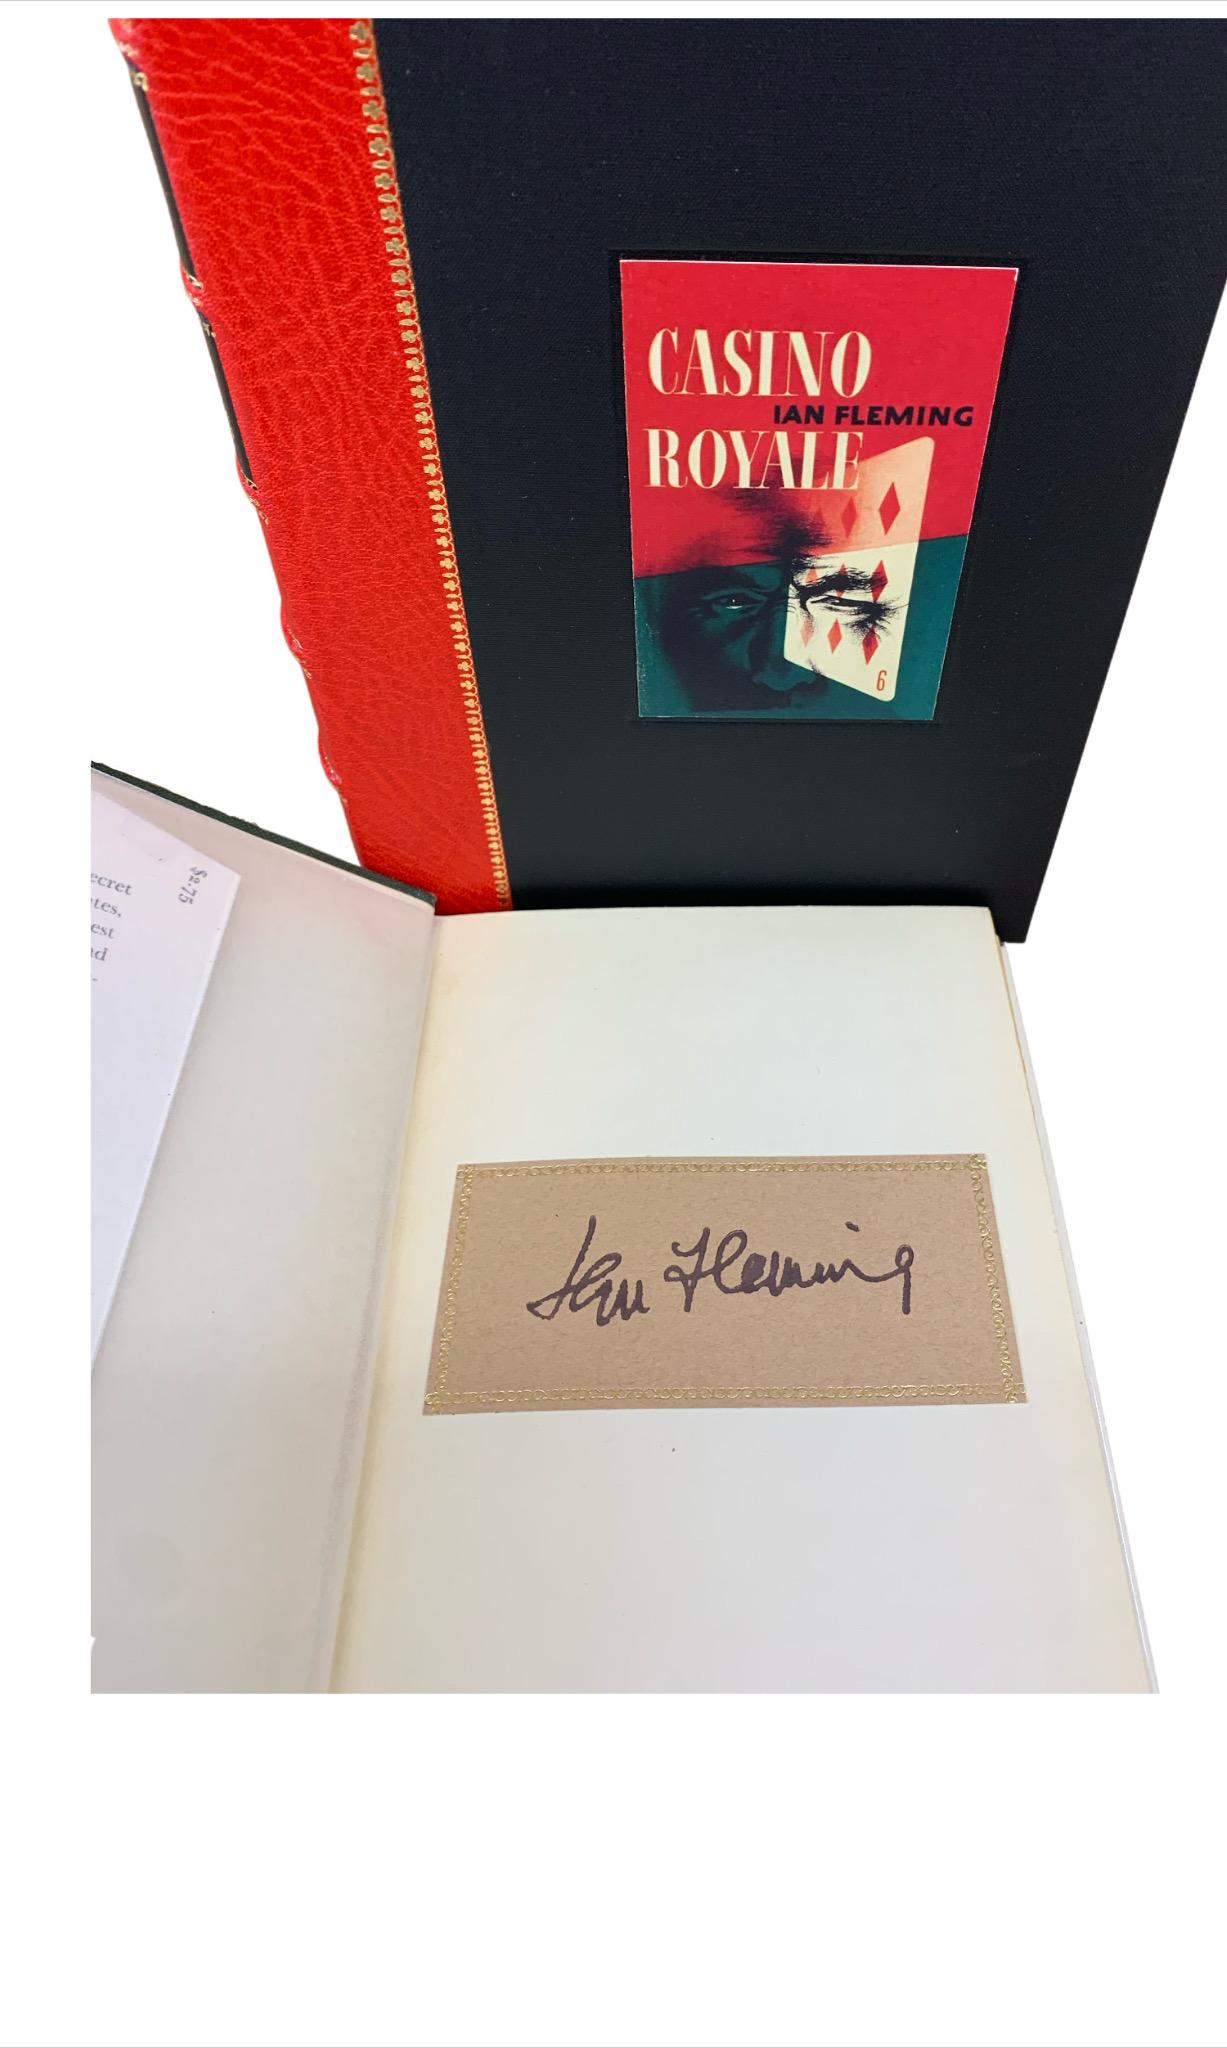 Fleming, Ian. Casino Royale. New York: The MacMillan Company, 1954. First edition, first printing. Octavo, in original green cloth boards with red lettering to spine and front boards. Original dust jacket. Tipped in signature to front free page.